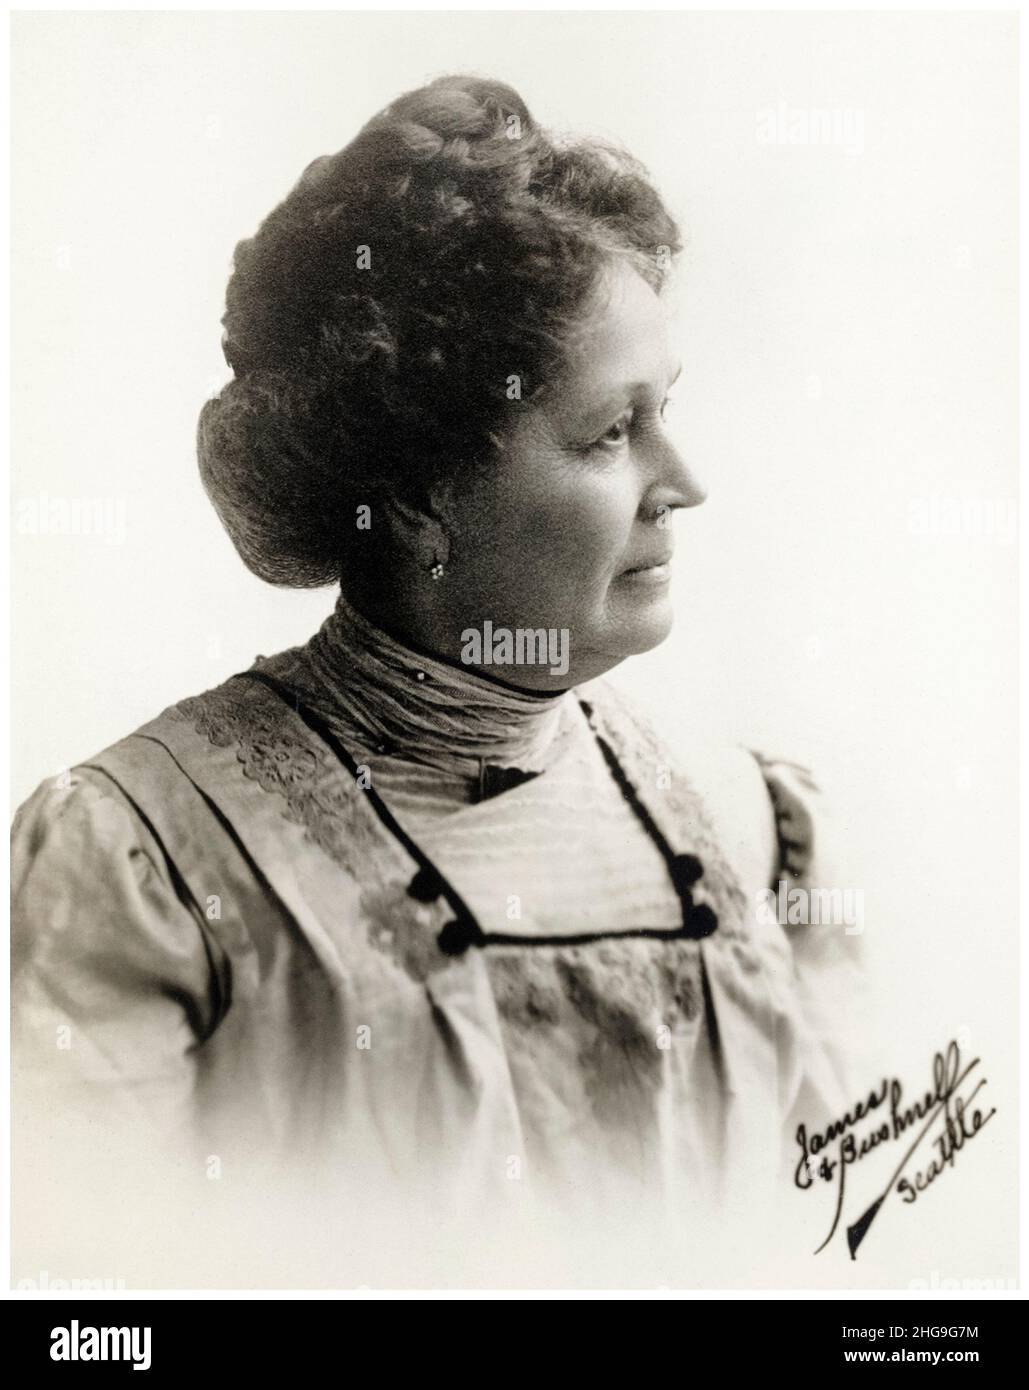 Emma Smith DeVoe (1848-1927), American women's suffragist and President of the National Council of Women Voters, portrait photograph by James & Bushnell (Seattle), 1910-1920 Stock Photo